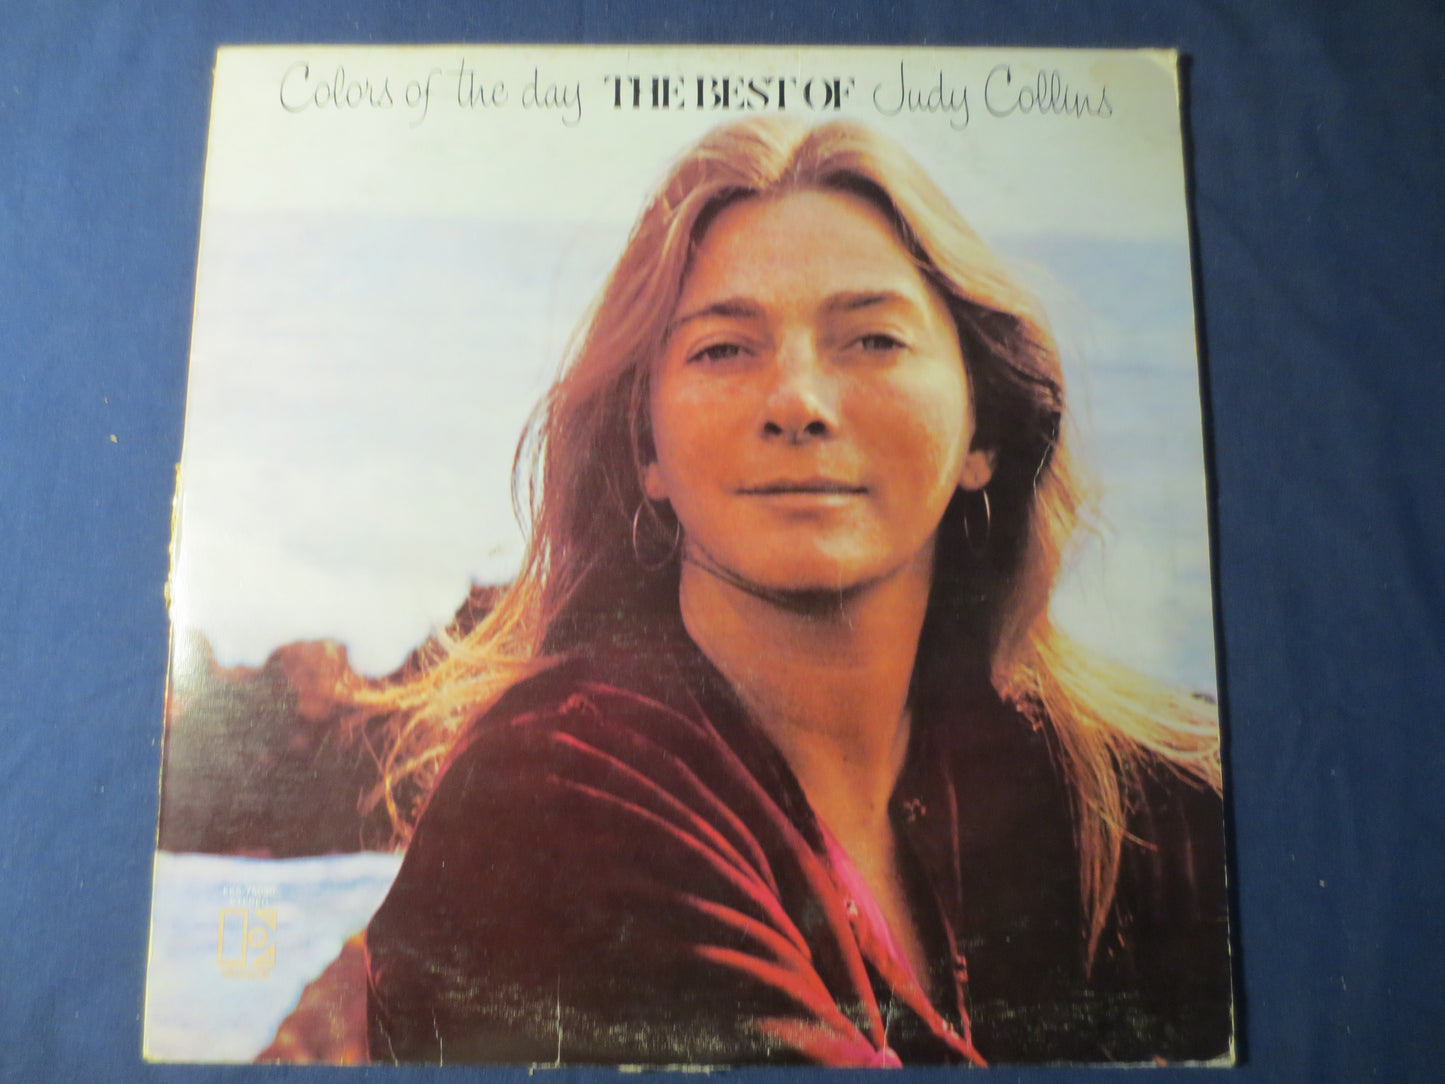 JUDY COLLINS Records, The BEST of, Judy Collins Album, Judy Collins Vinyl, Judy Collins Lp, Vintage Vinyl, 1972 Records